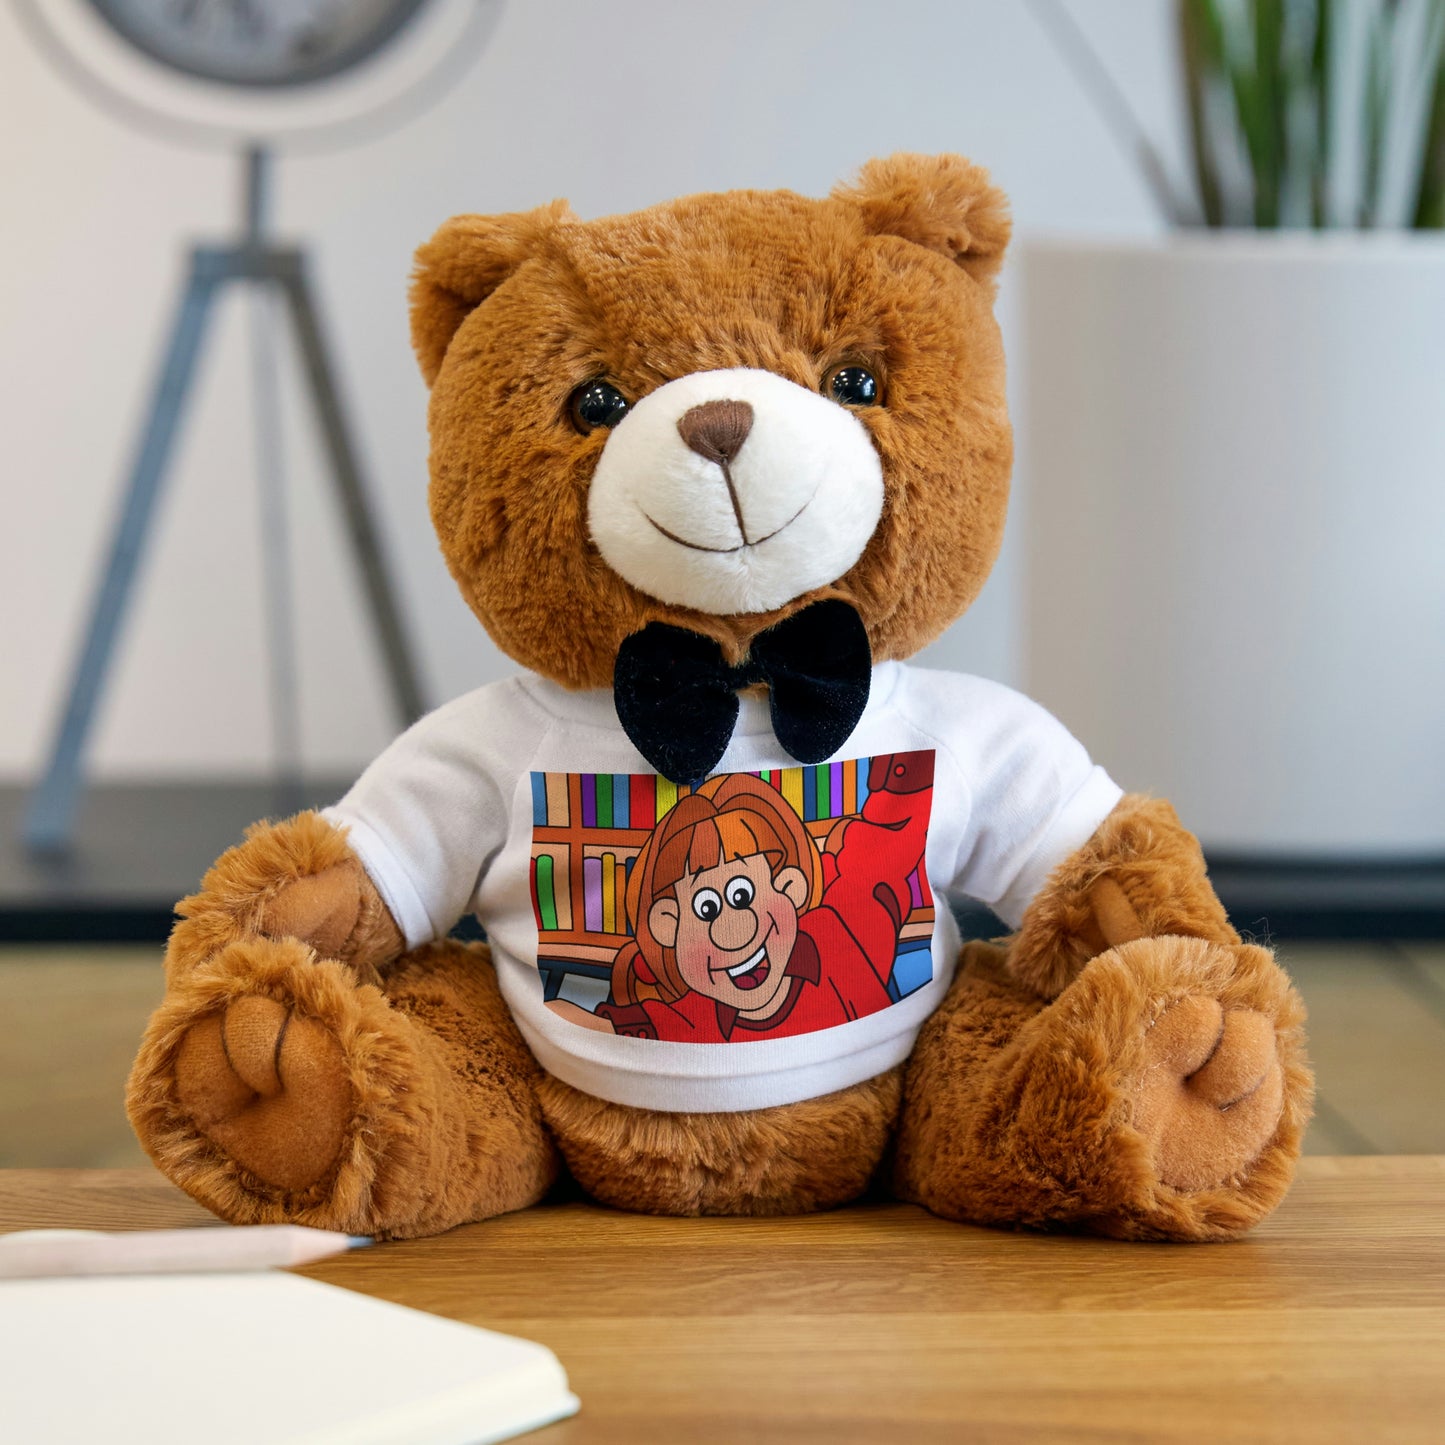 Pick Me Cried Arilla! Teddy Bear with T-Shirt